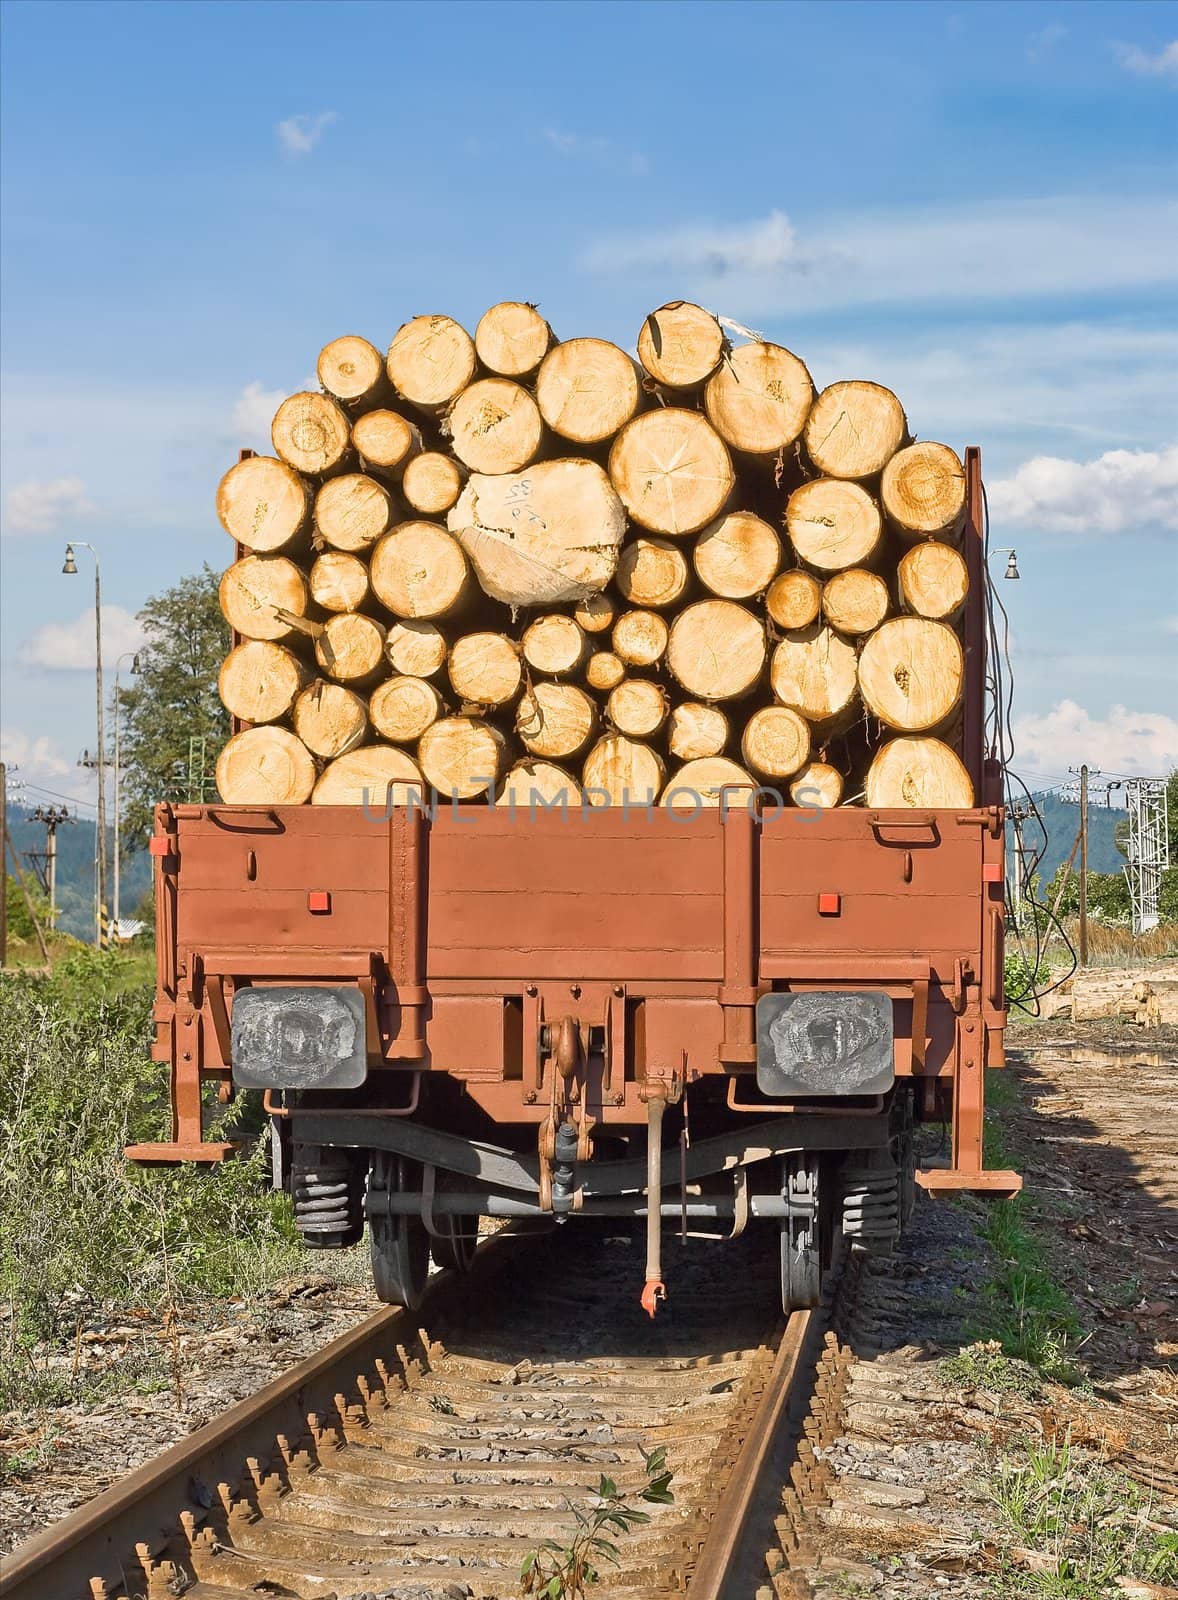 Transporting wooden logs